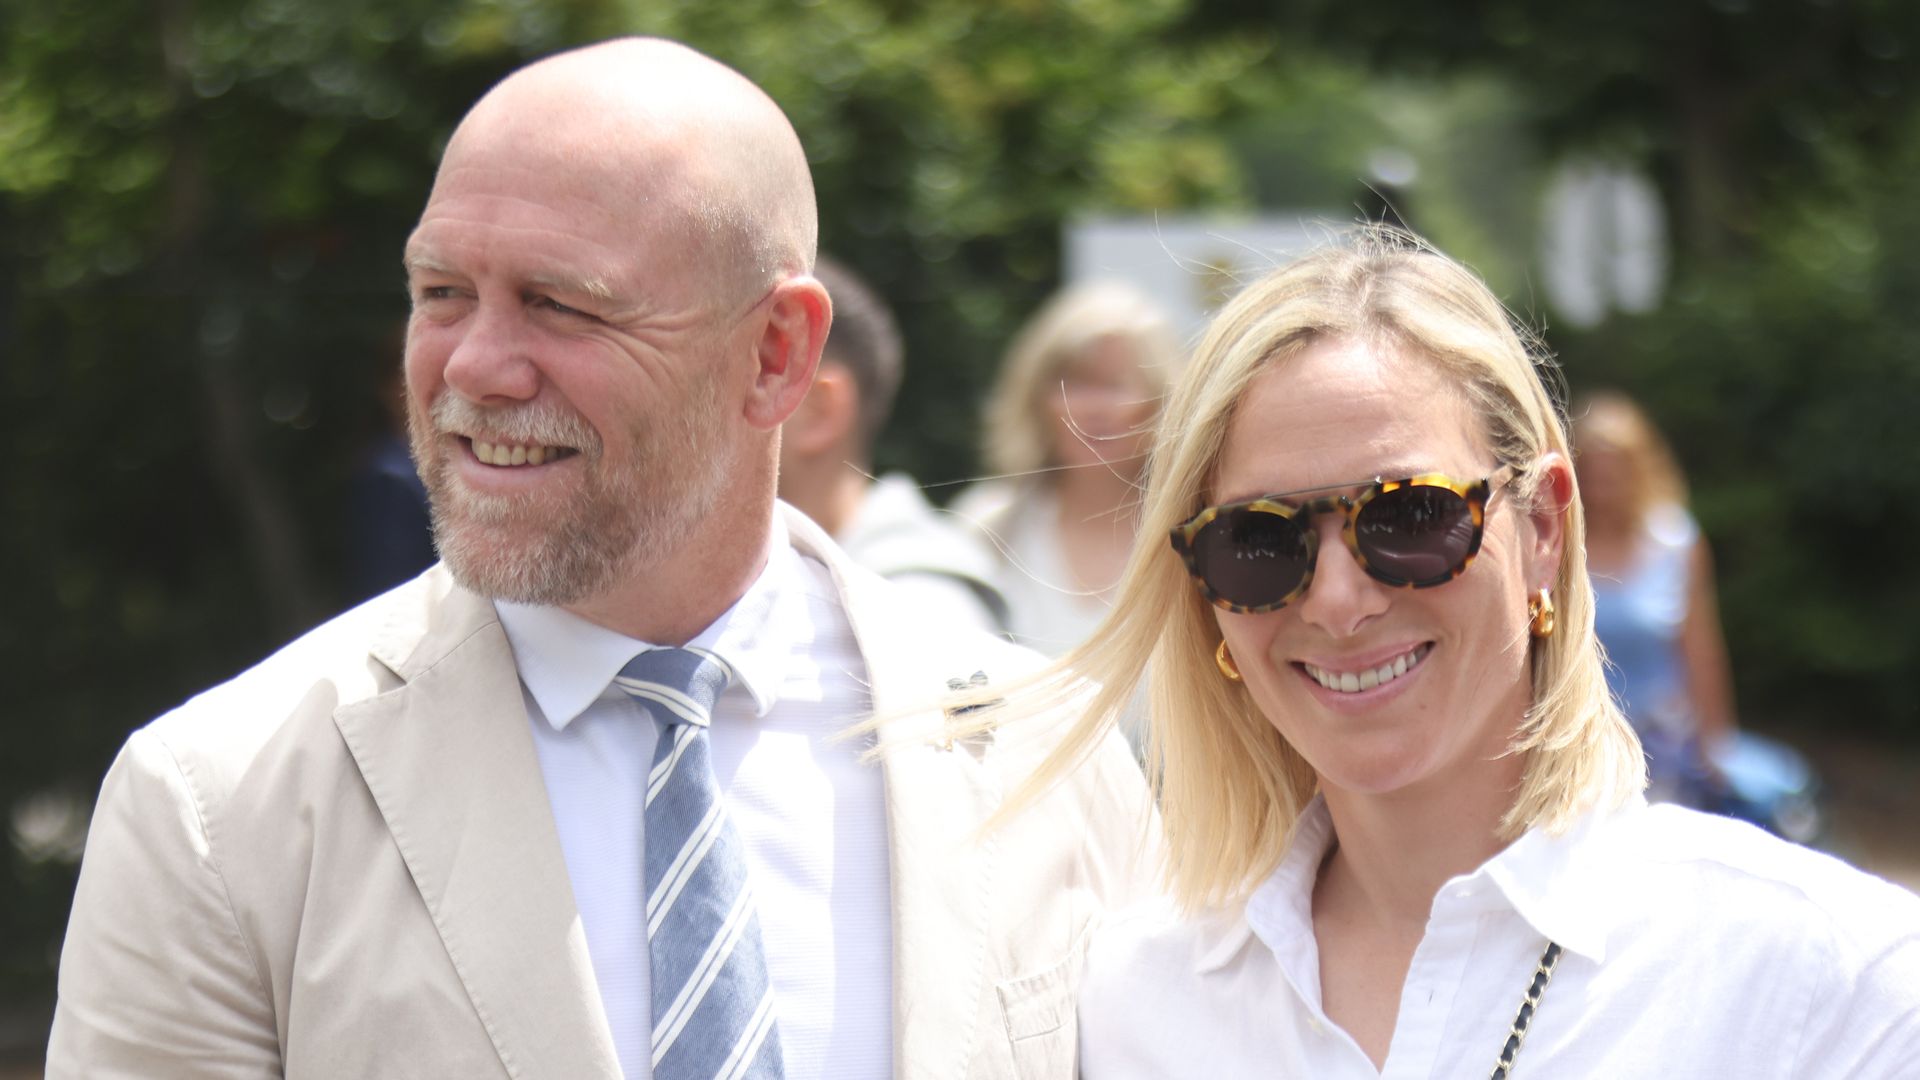 Zara and Mike Tindall arrive at Wimbledon during day two of the 2022 Wimbledon Championships at the All England Lawn Tennis and Croquet Club, Wimbledon.